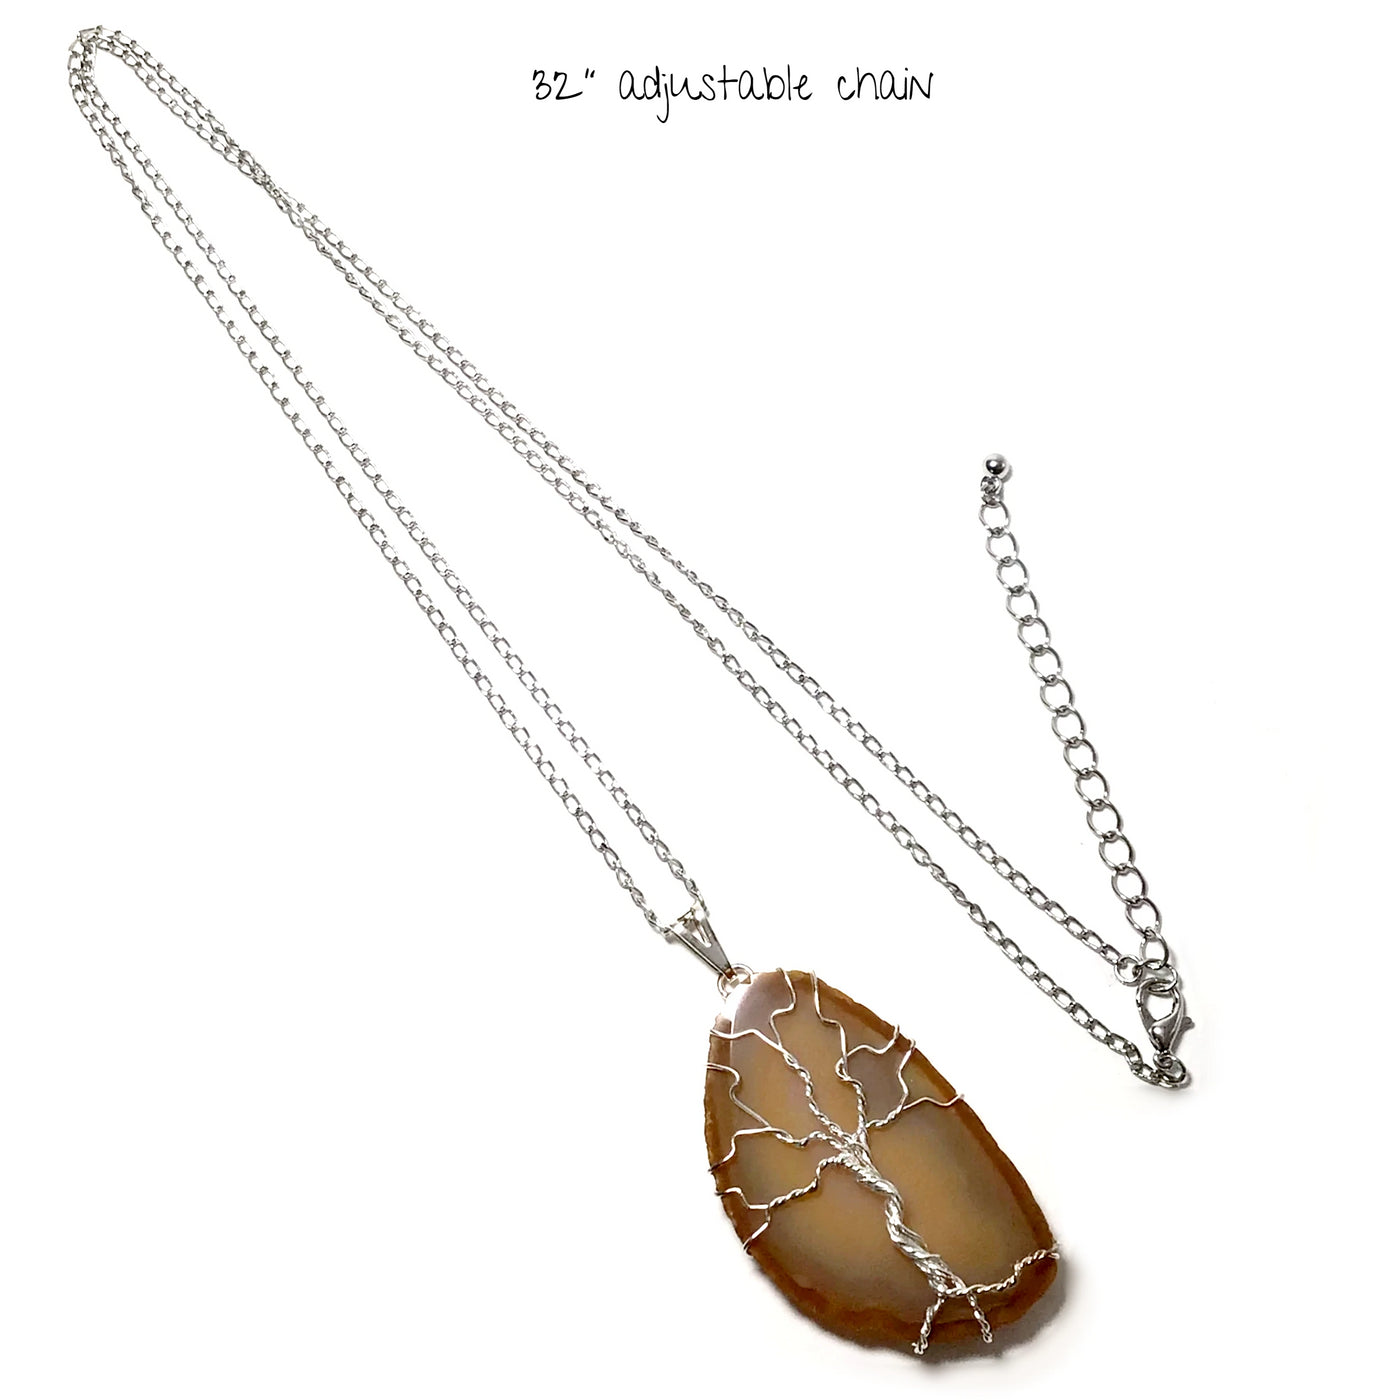 Tree of Life on Agate Slice Necklace - Silver Plated